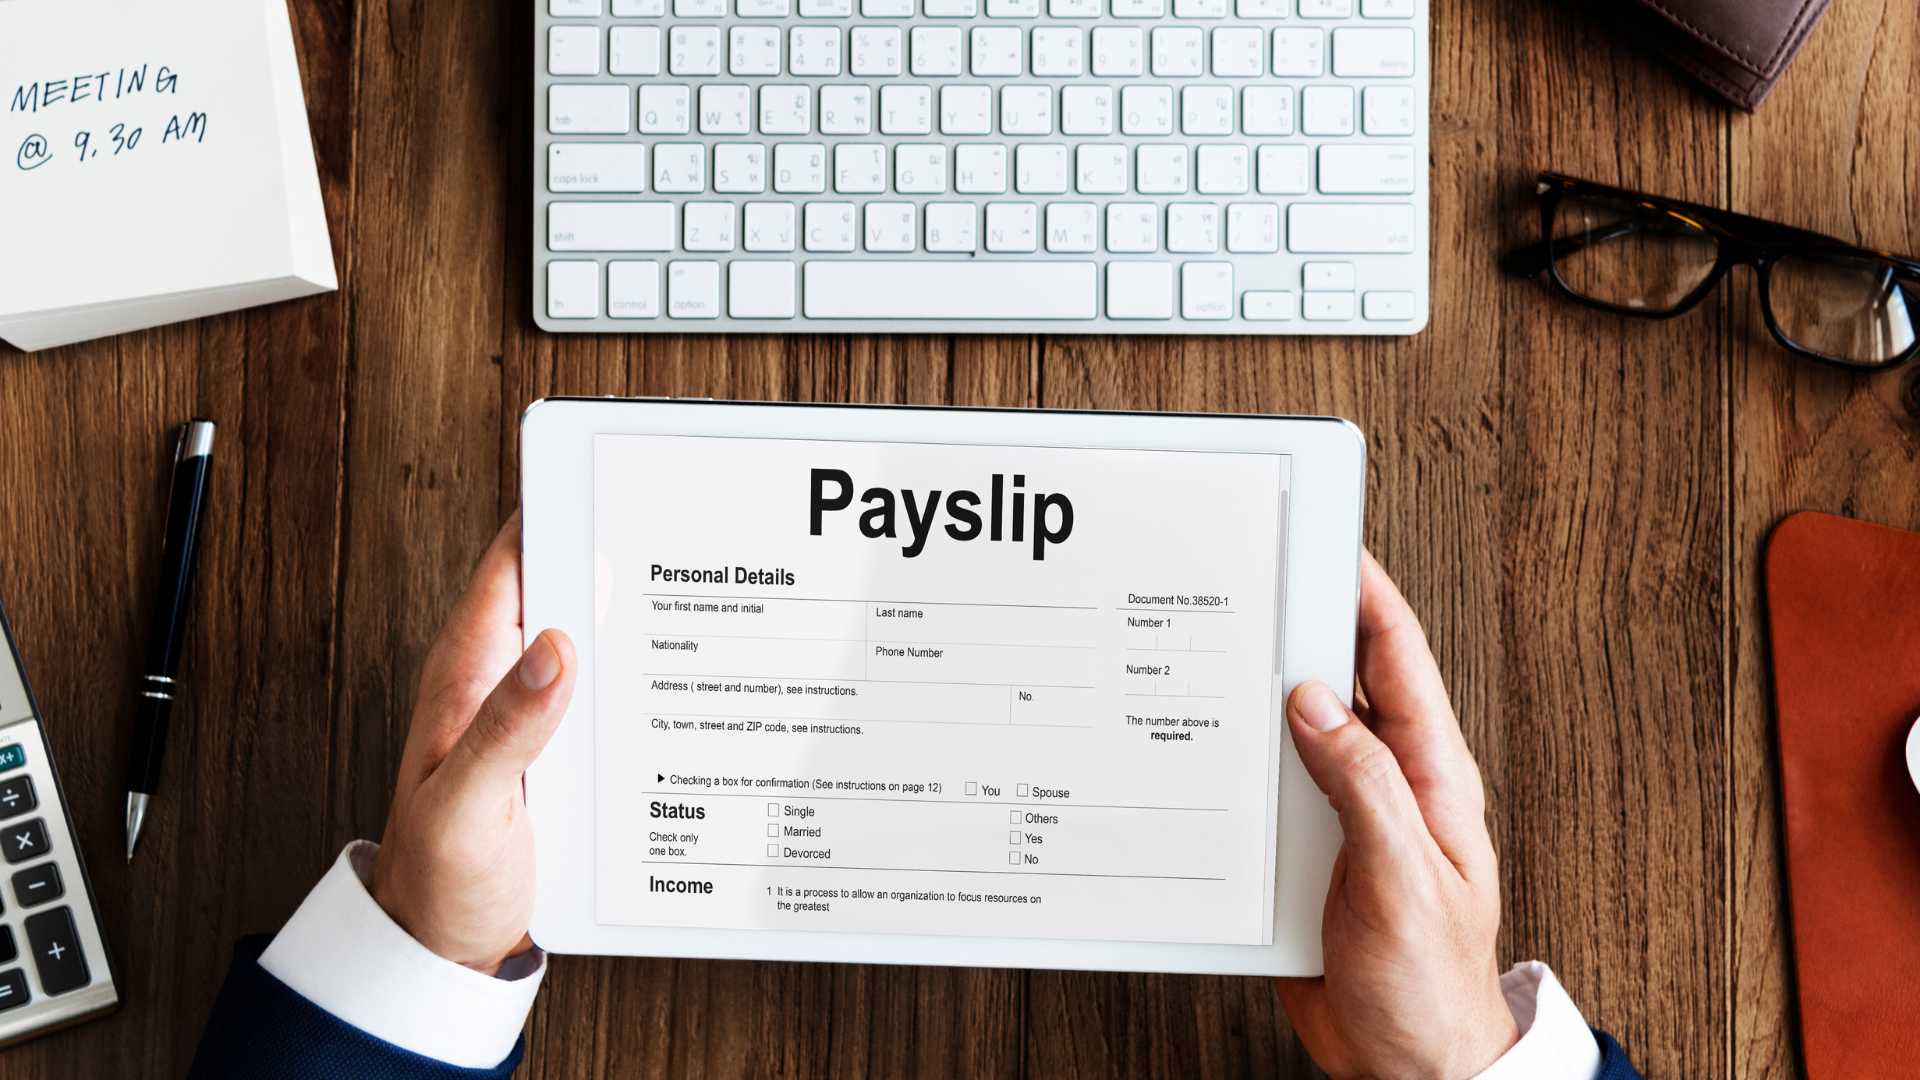 You are currently viewing Karuvoolam IFHRMS: How to Log in and Download IFHRMS Payslip?